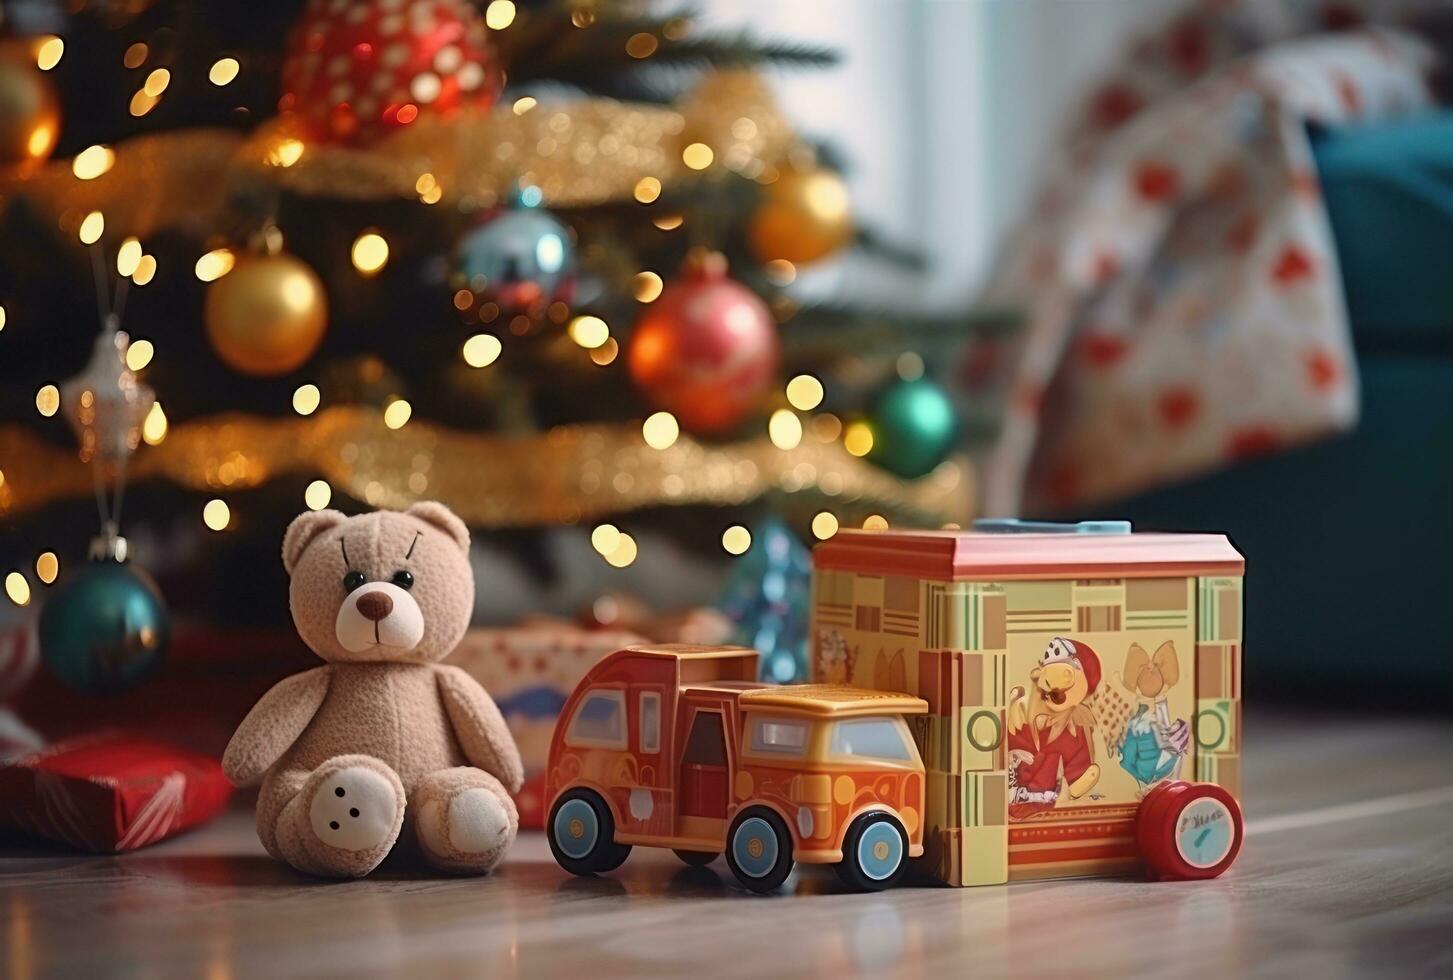 There are toys under the decorated Christmas tree photo